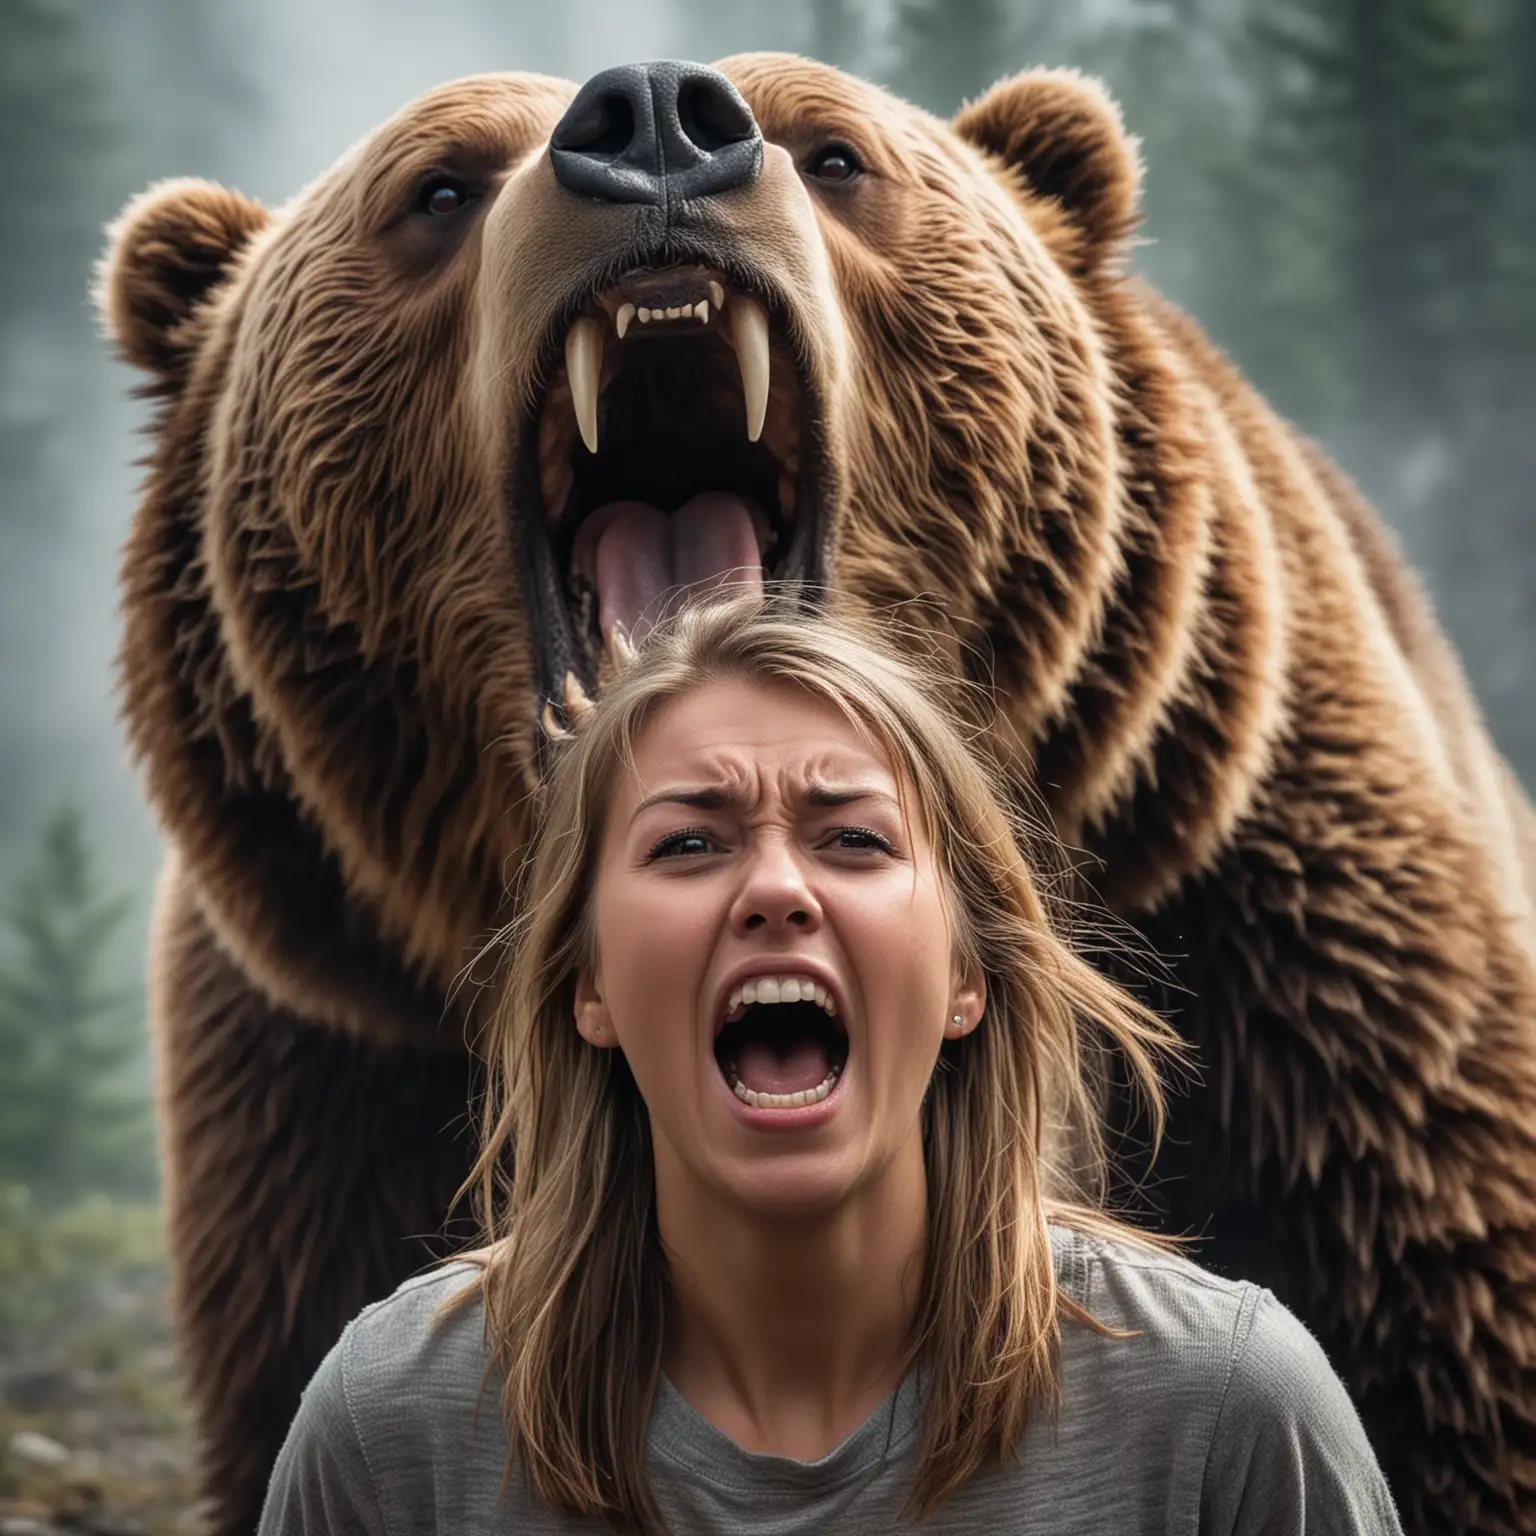 scared person with a grizzly bear roaring above, scared, teeth, roar, eyes